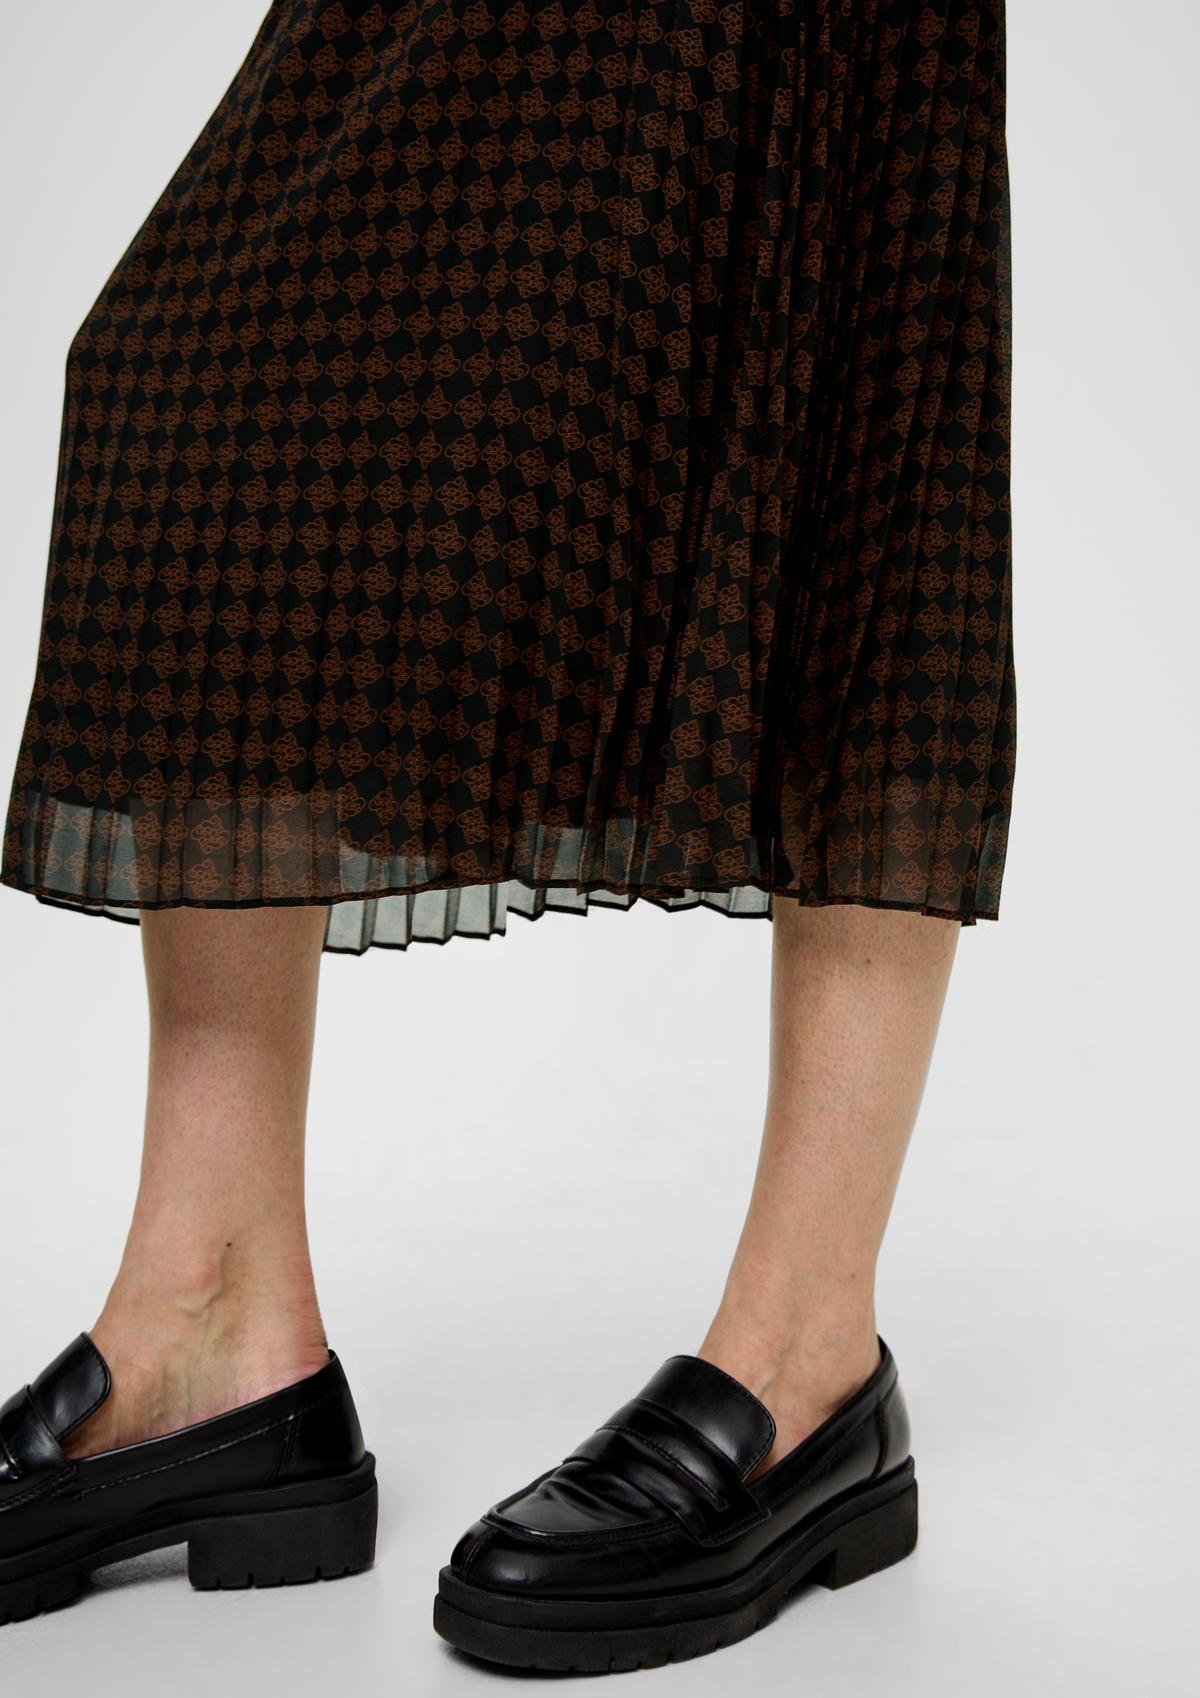 s.Oliver Midi skirt with pleats